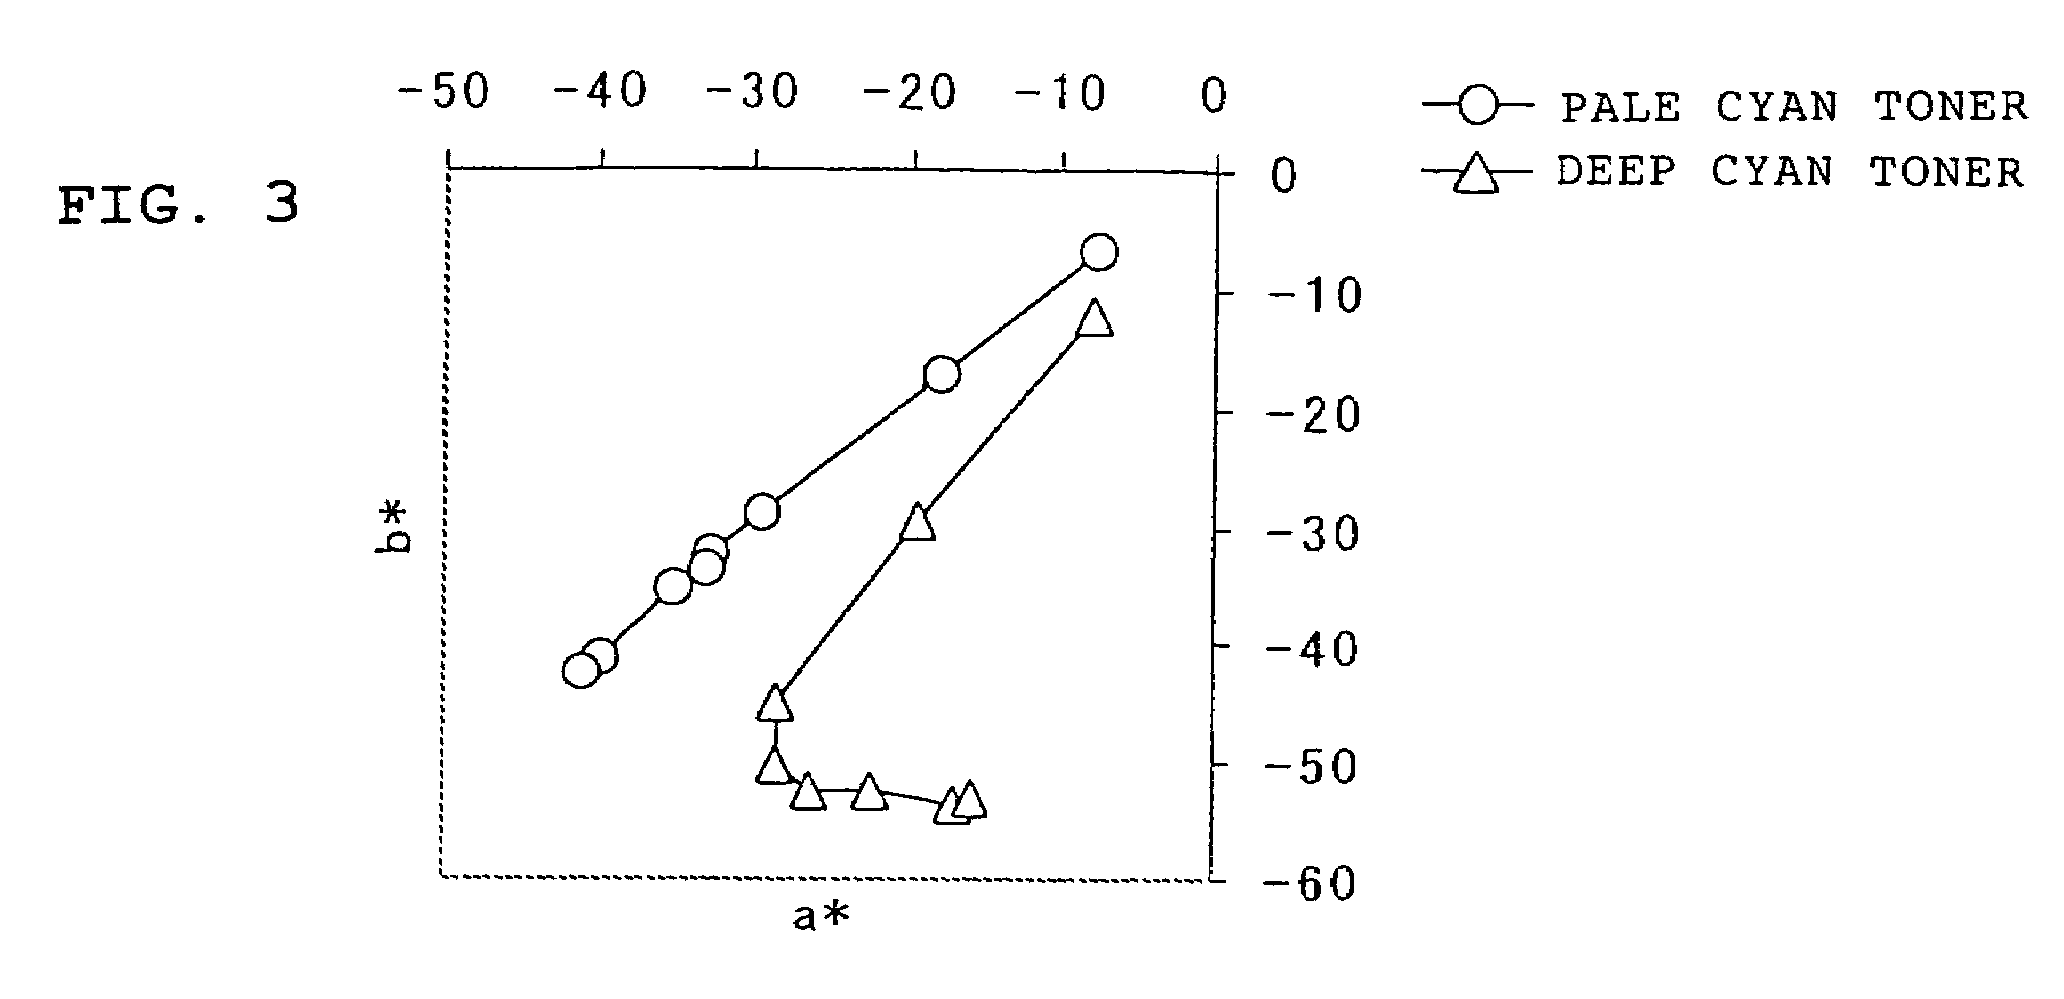 Cyan toner and method for forming an image